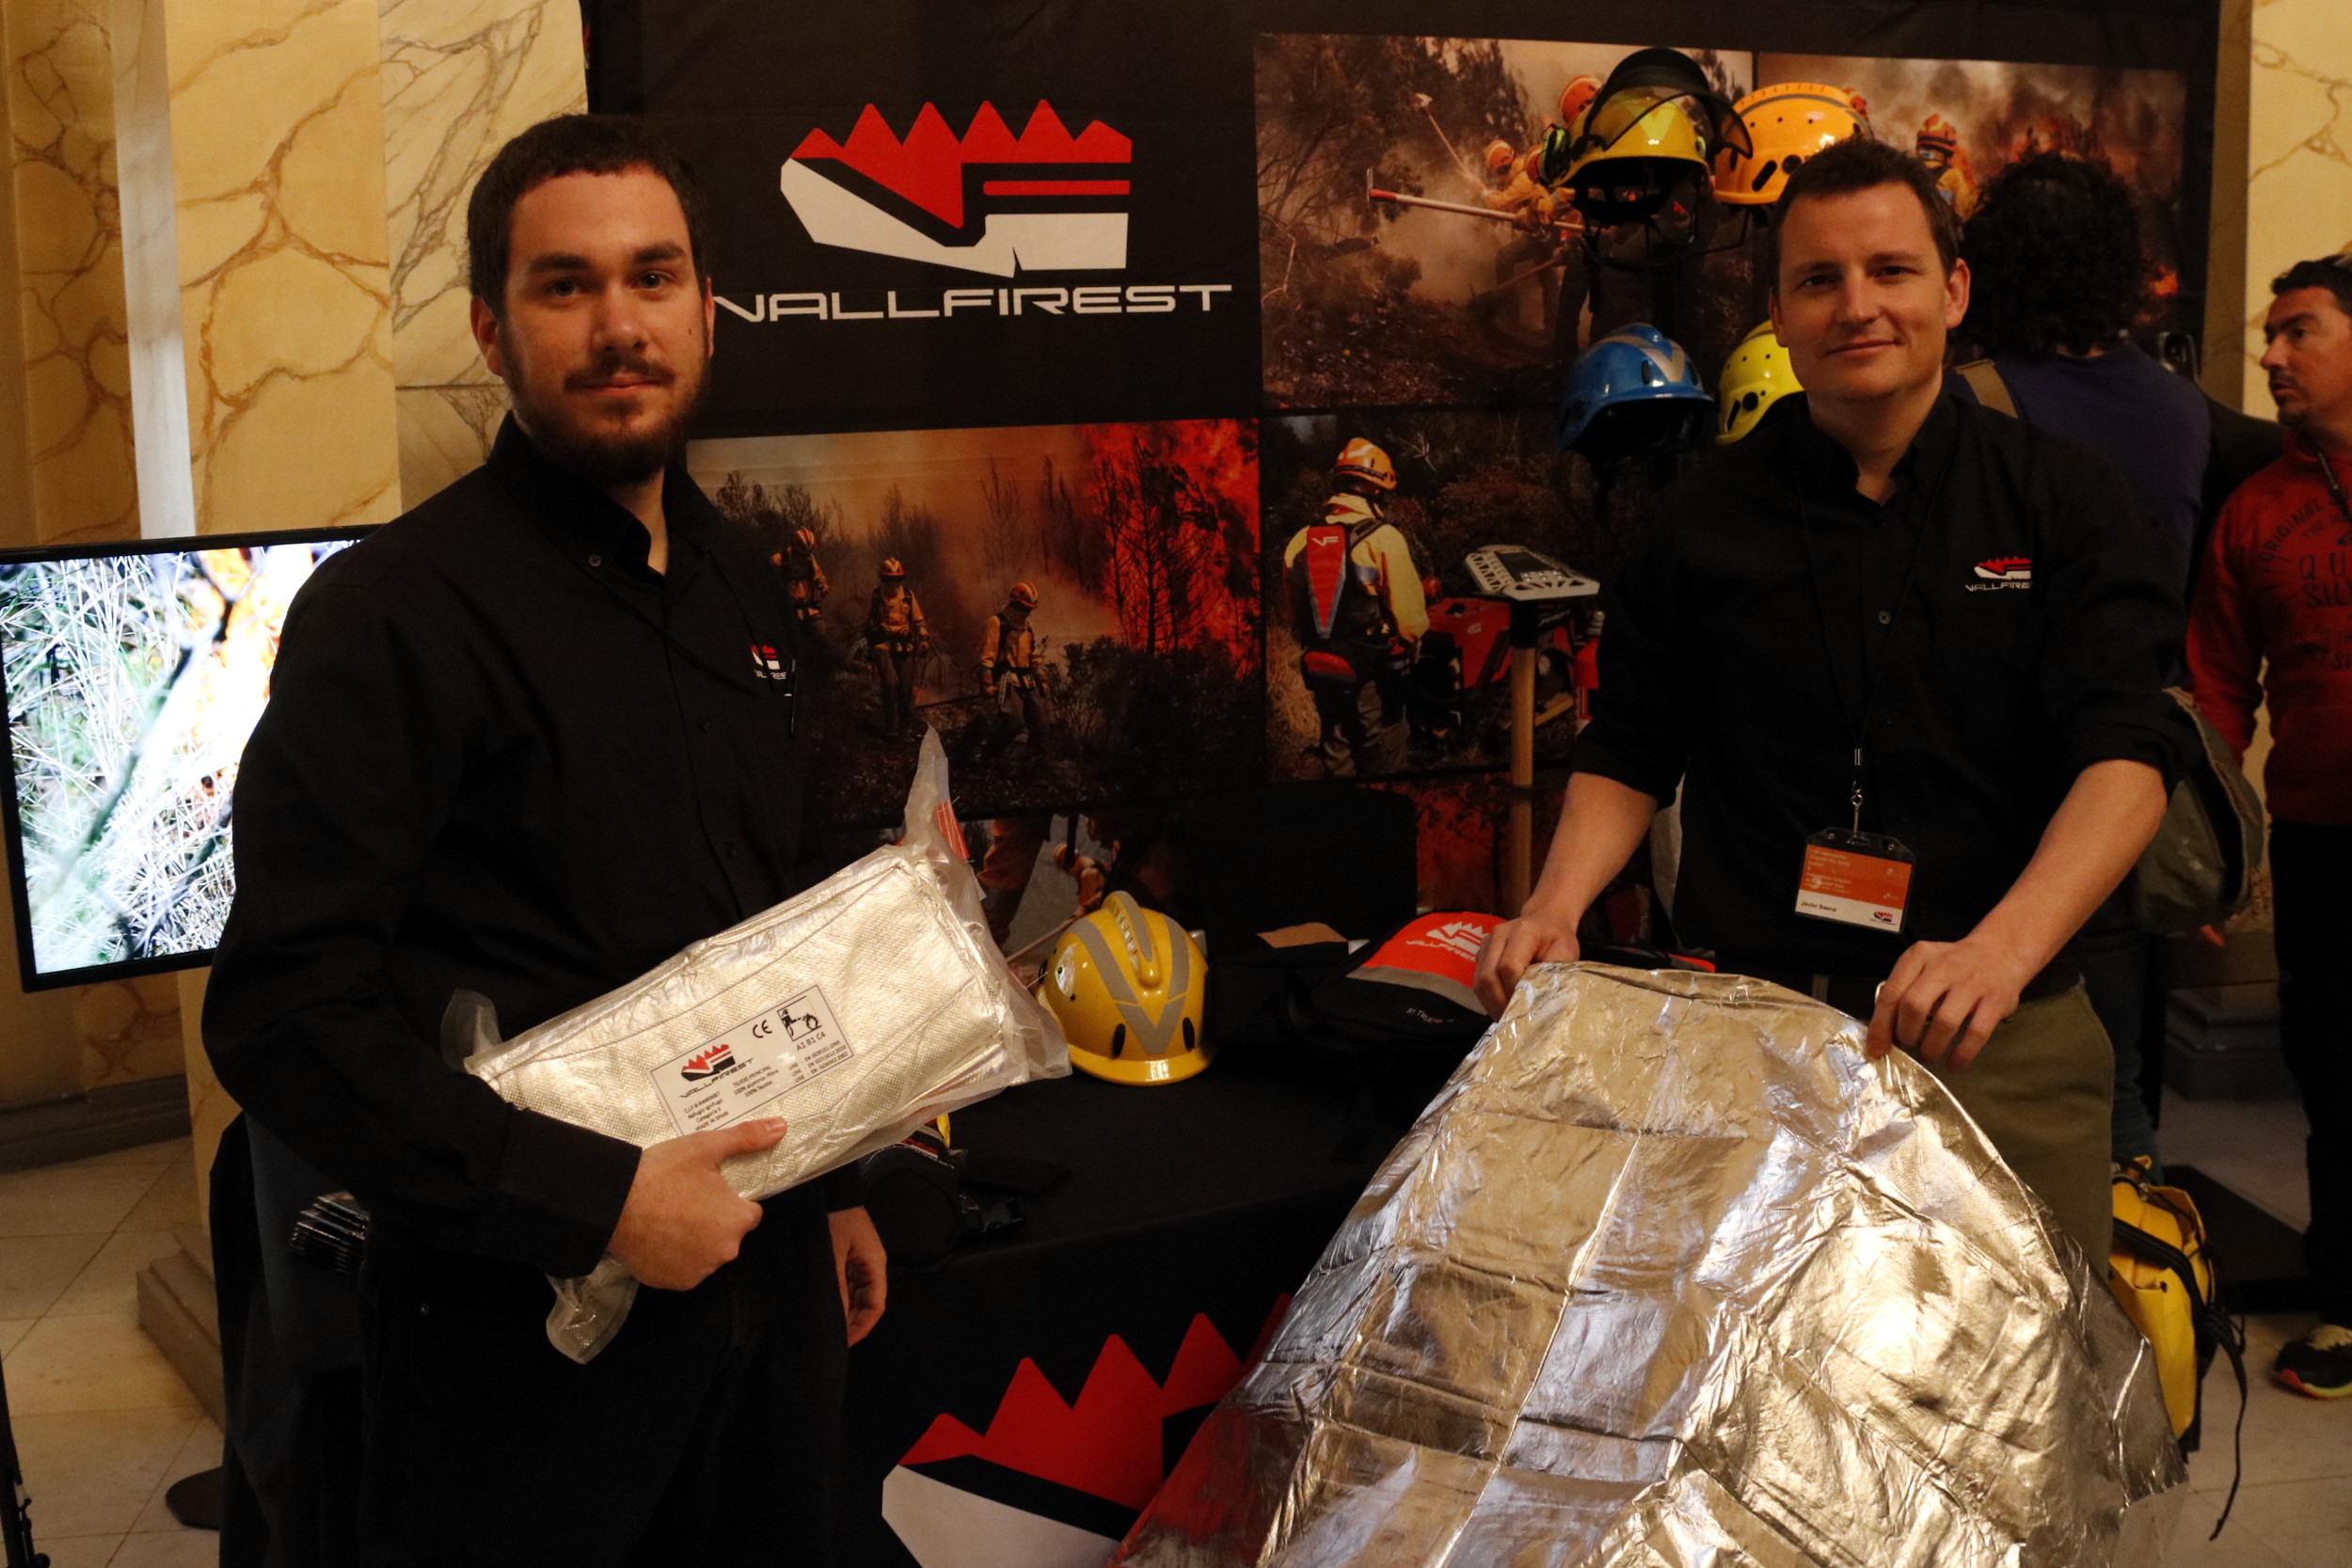 'Vallfirest' chairman, Javier Baena, and one of his collaborator showing the new survival kit for firefighters (by ACN)